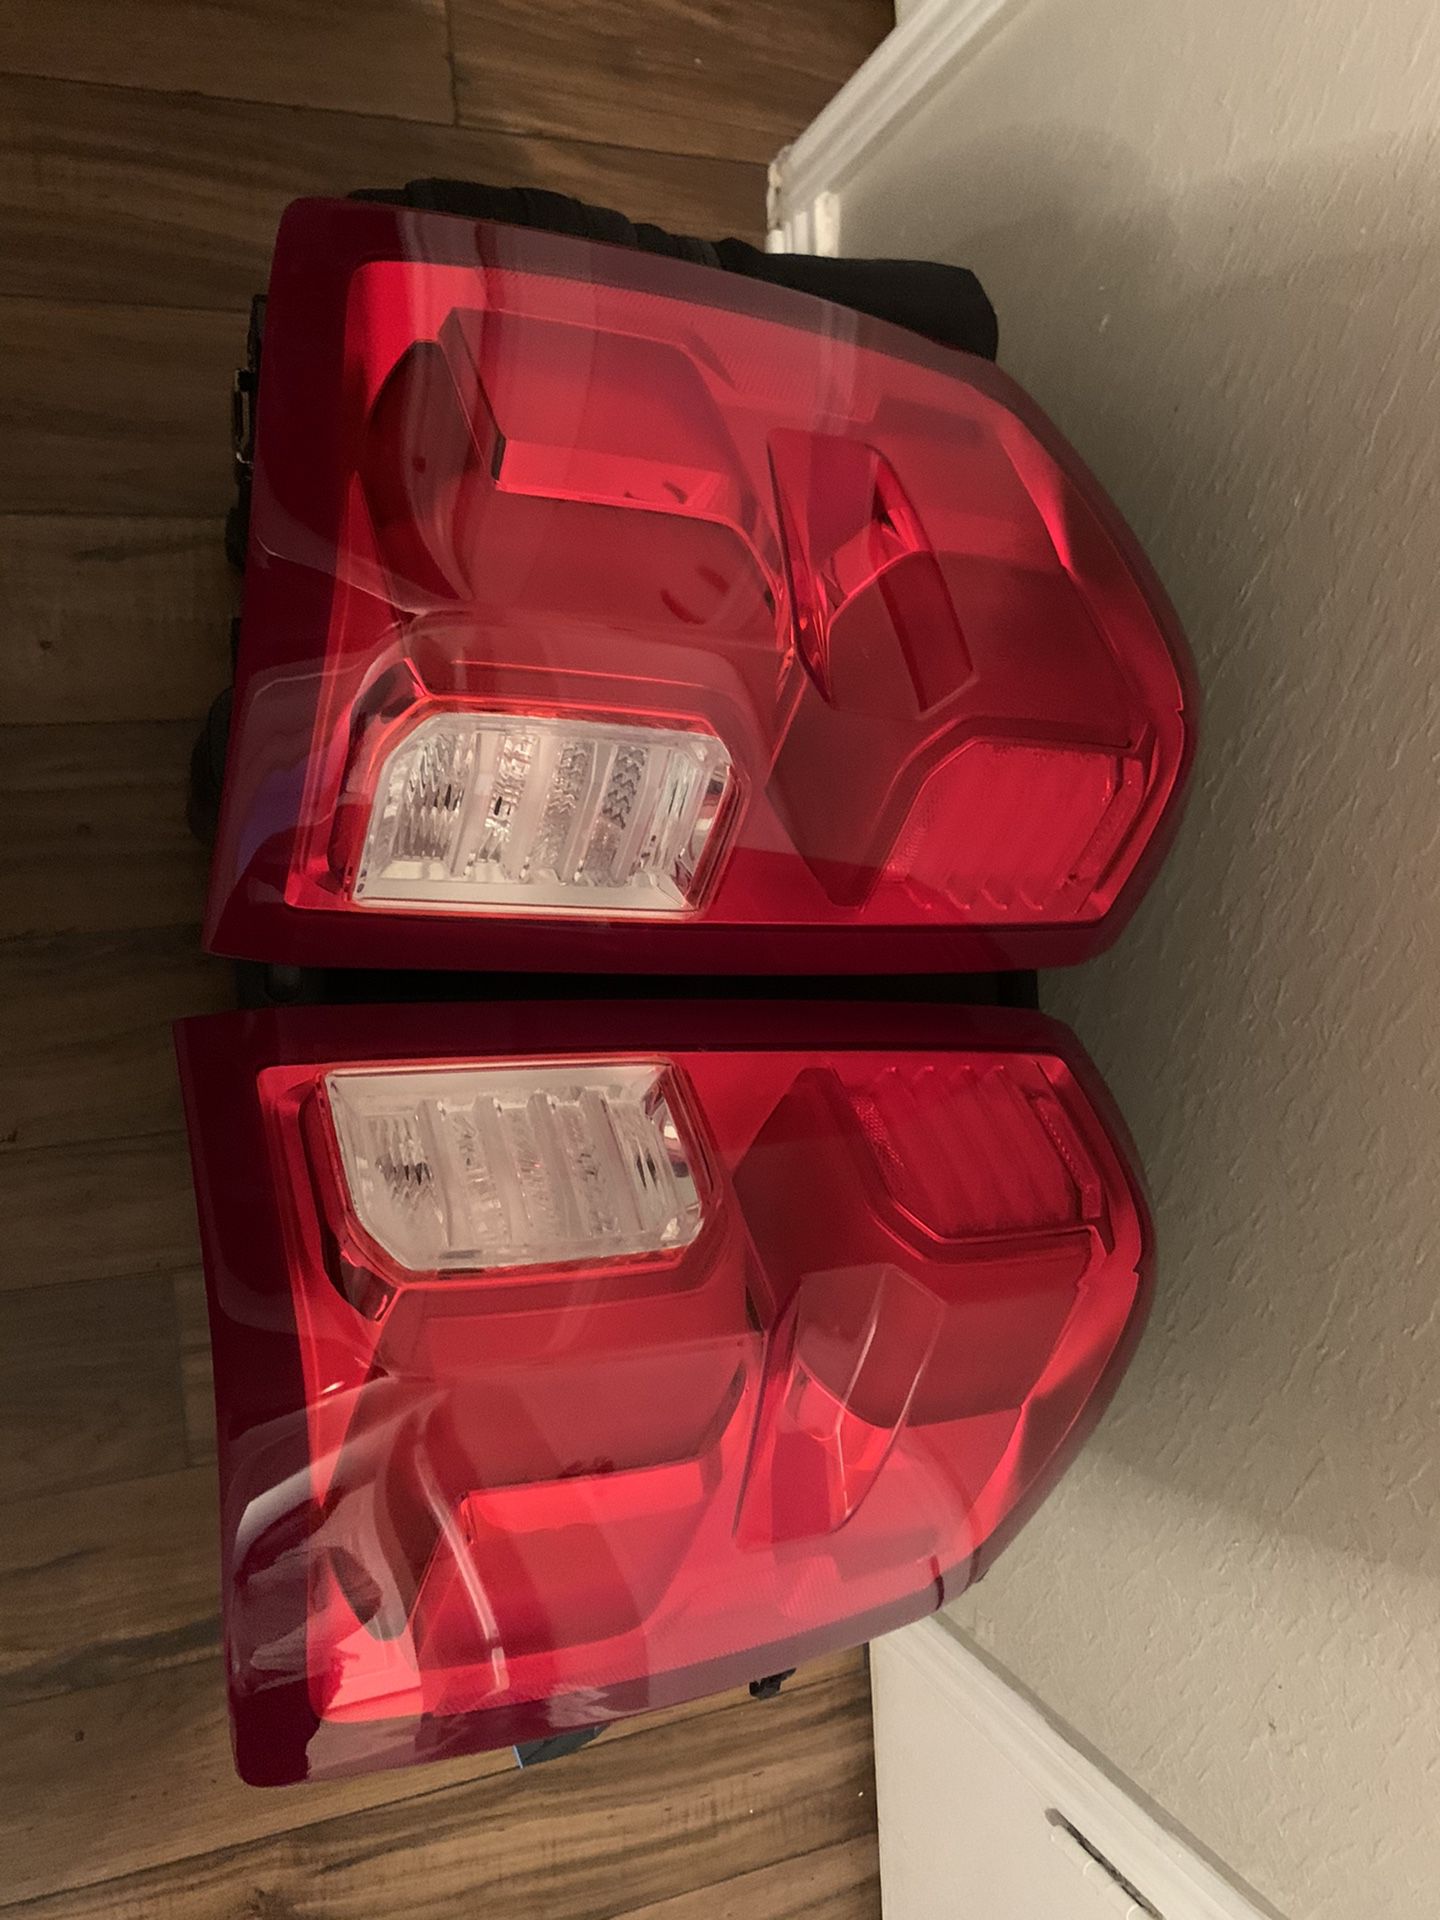 2014-18 LTZ HIGH COUNTRY TAILLIGHTS